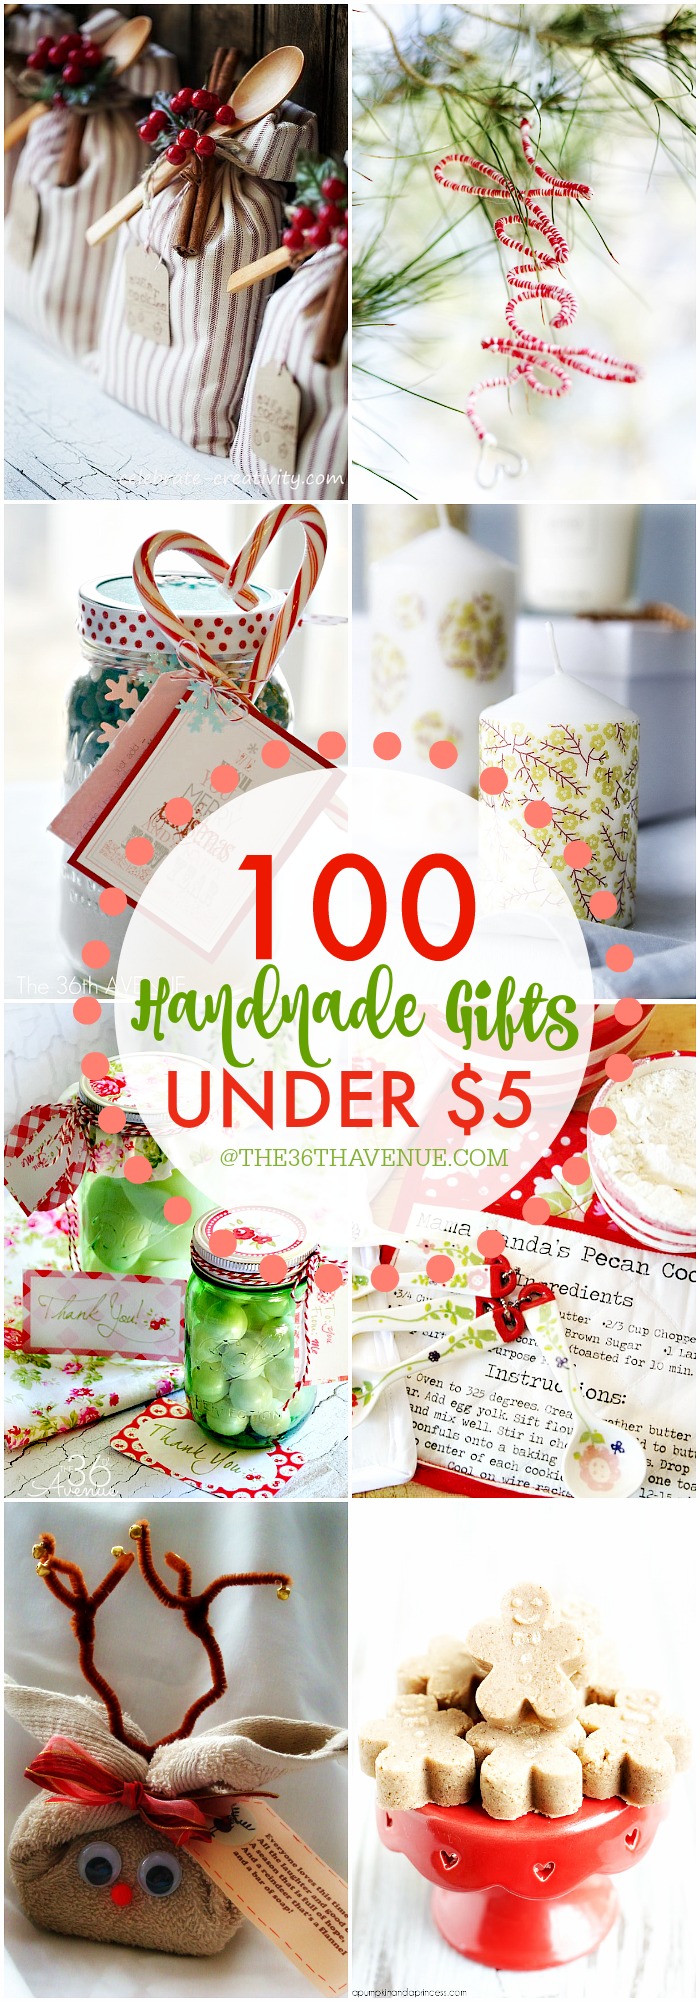 100 Handmade Gifts Under Five Dollars. Must see them all! PIN IT NOW and make them later!